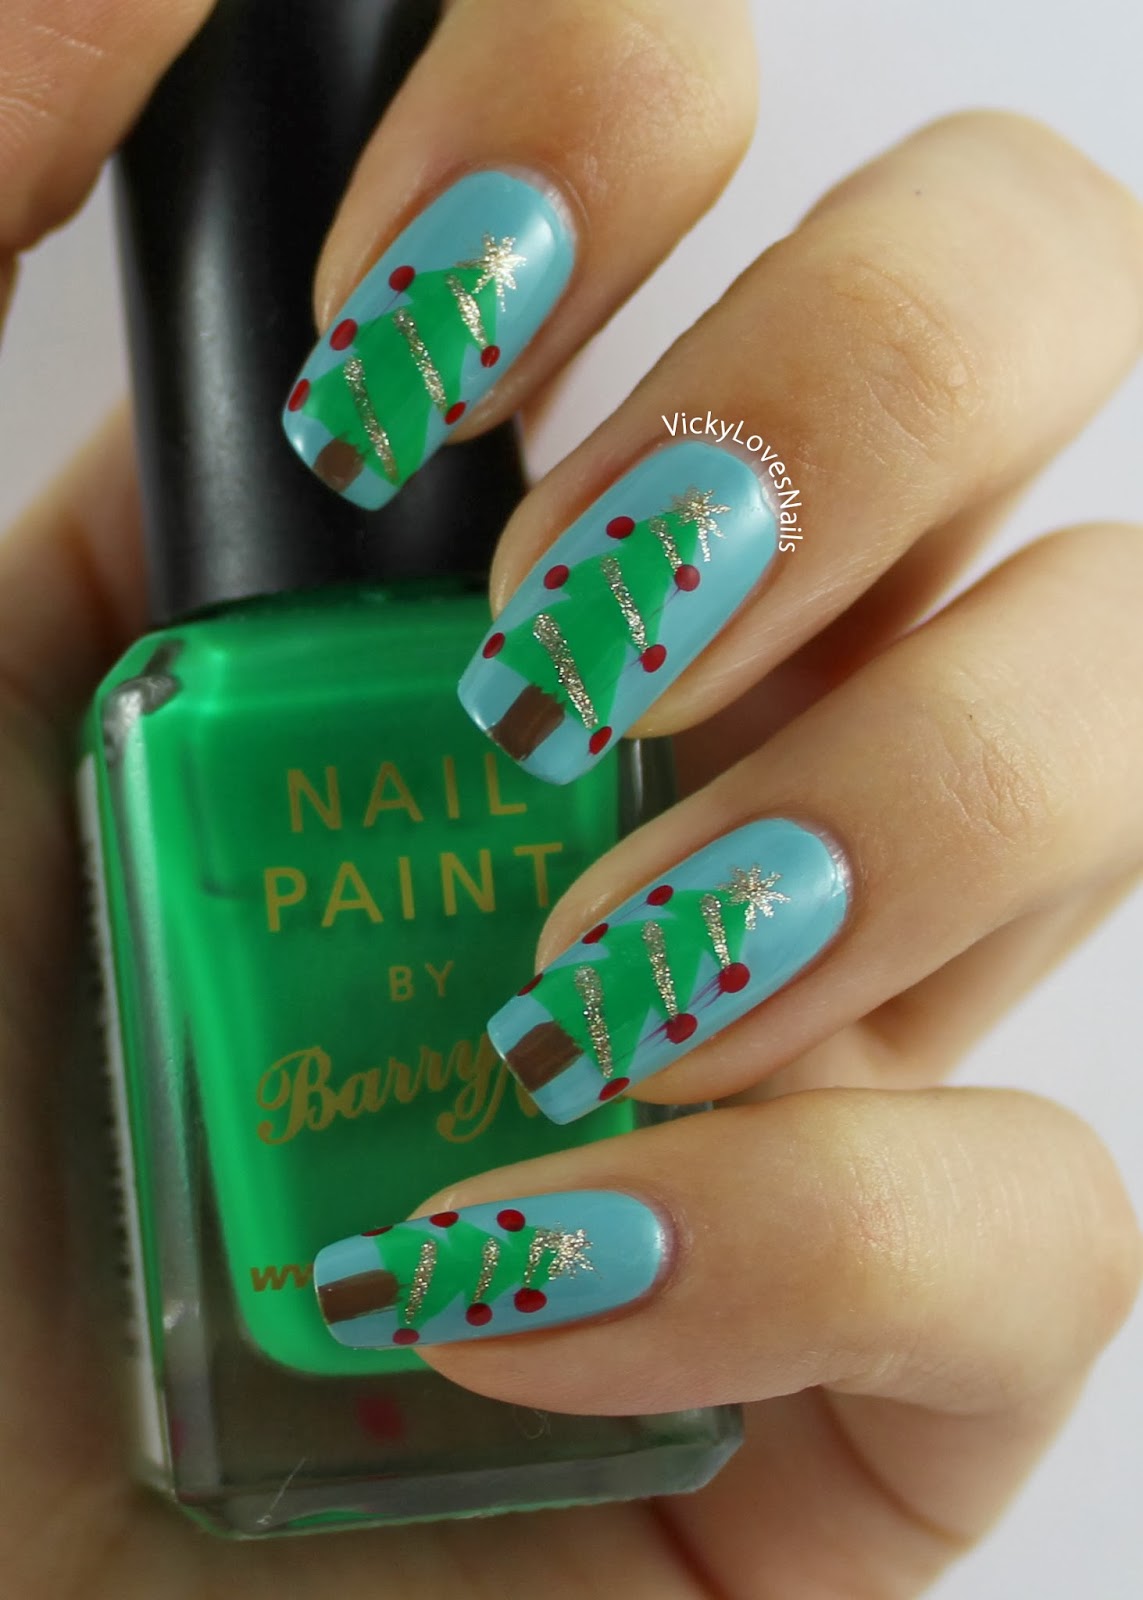 Vicky Loves Nails!: 12 Days Of Christmas Challenge: Day 11 - Christmas ...